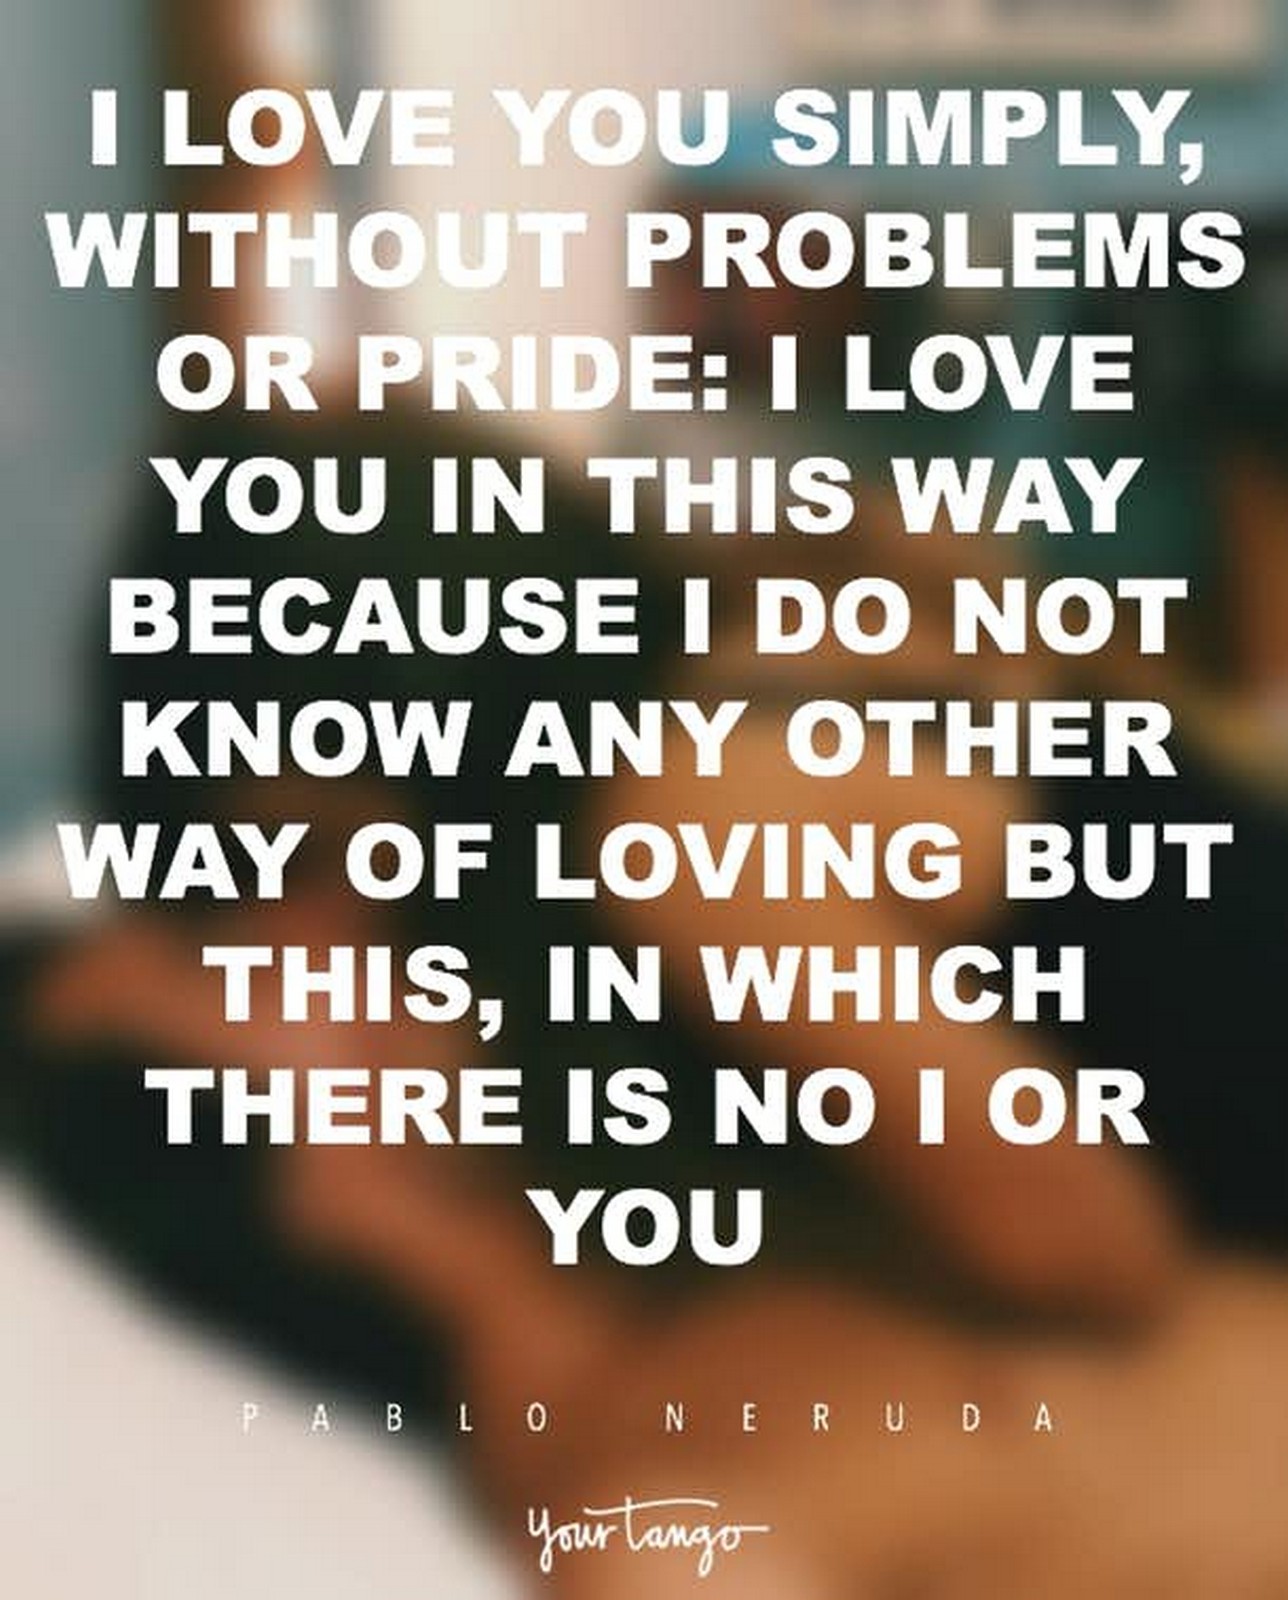 55 Romantic Quotes - "I love you simply, without problems or pride: I love you in this way because I do not know any other way of loving but this, in which there is no I or you." - Pablo Neruda